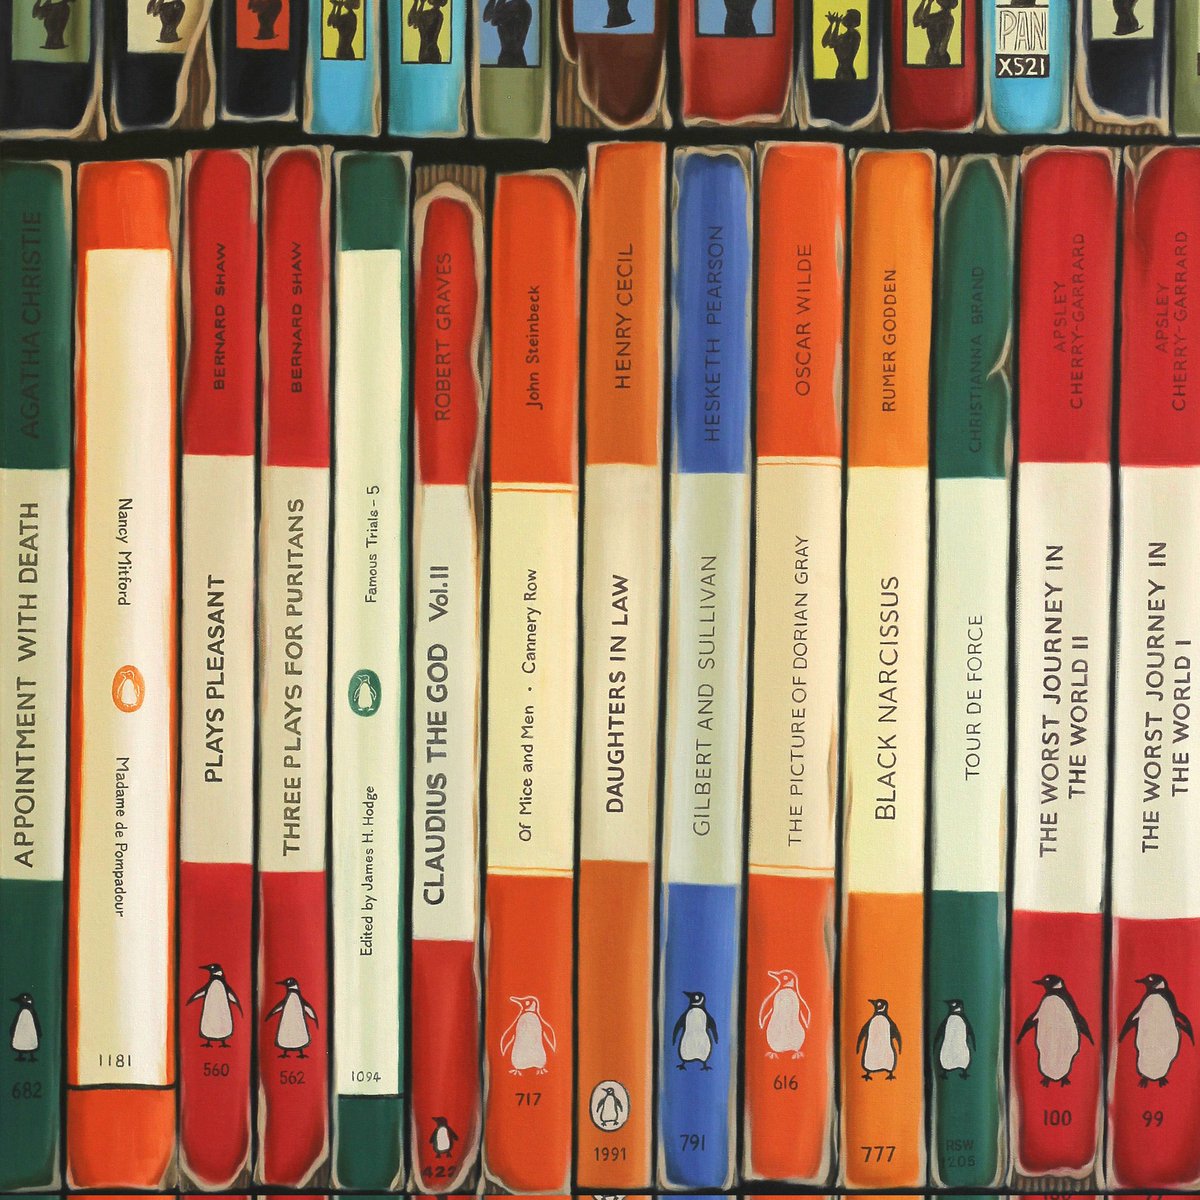 A blast from the past here with my 'Plays Pleasant' #shelfportrait oil painting from 2019 A merry throng of bright #penguinpaperbacks, with a glimpse of a row of vintage #panpaperbacks stacked on top of them 💚